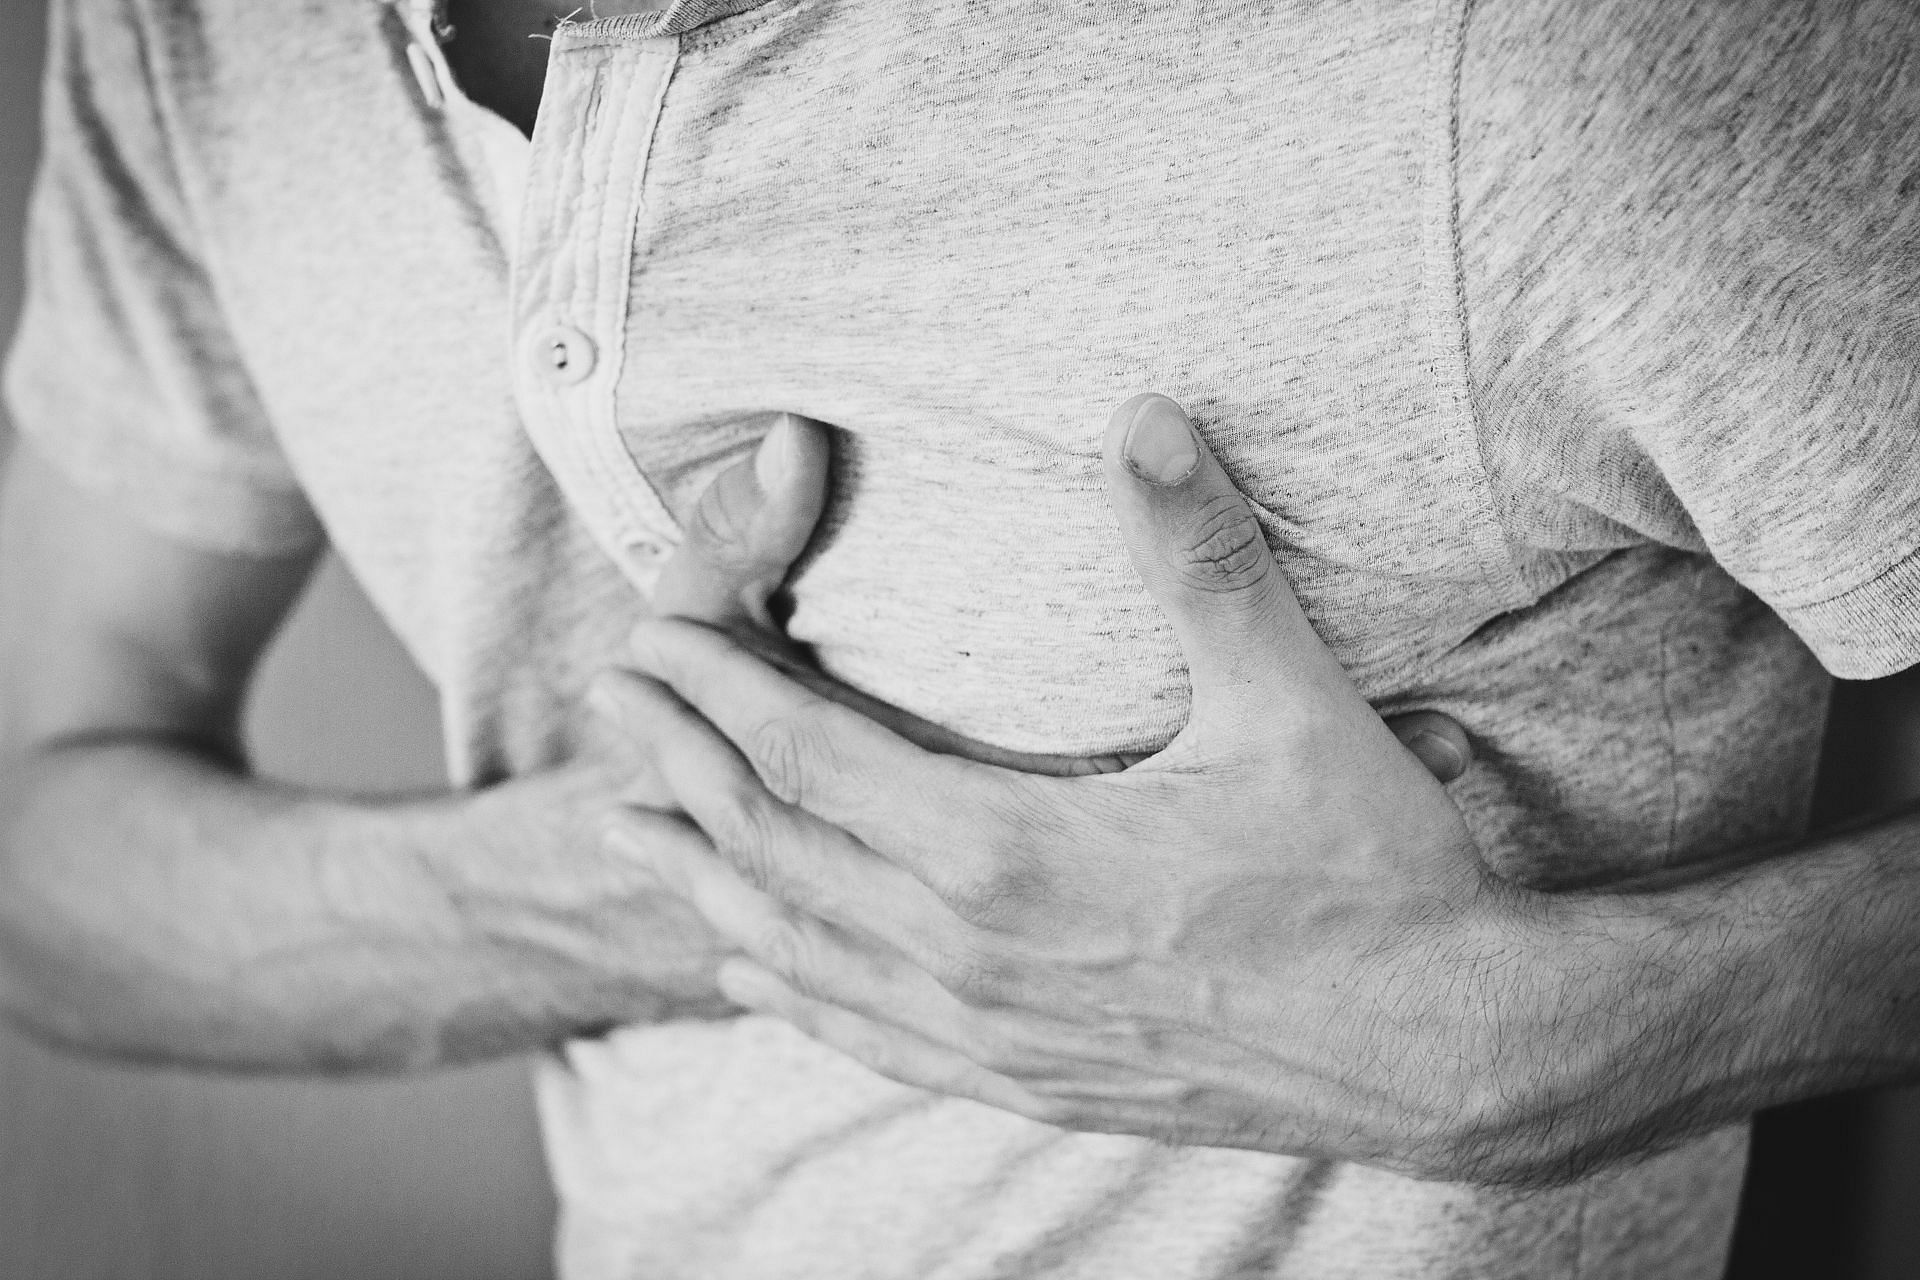 the one who received the second dose of Pfizer vaccine developed the symptoms of heart inflammation. (image via pexels / freestocksorg)